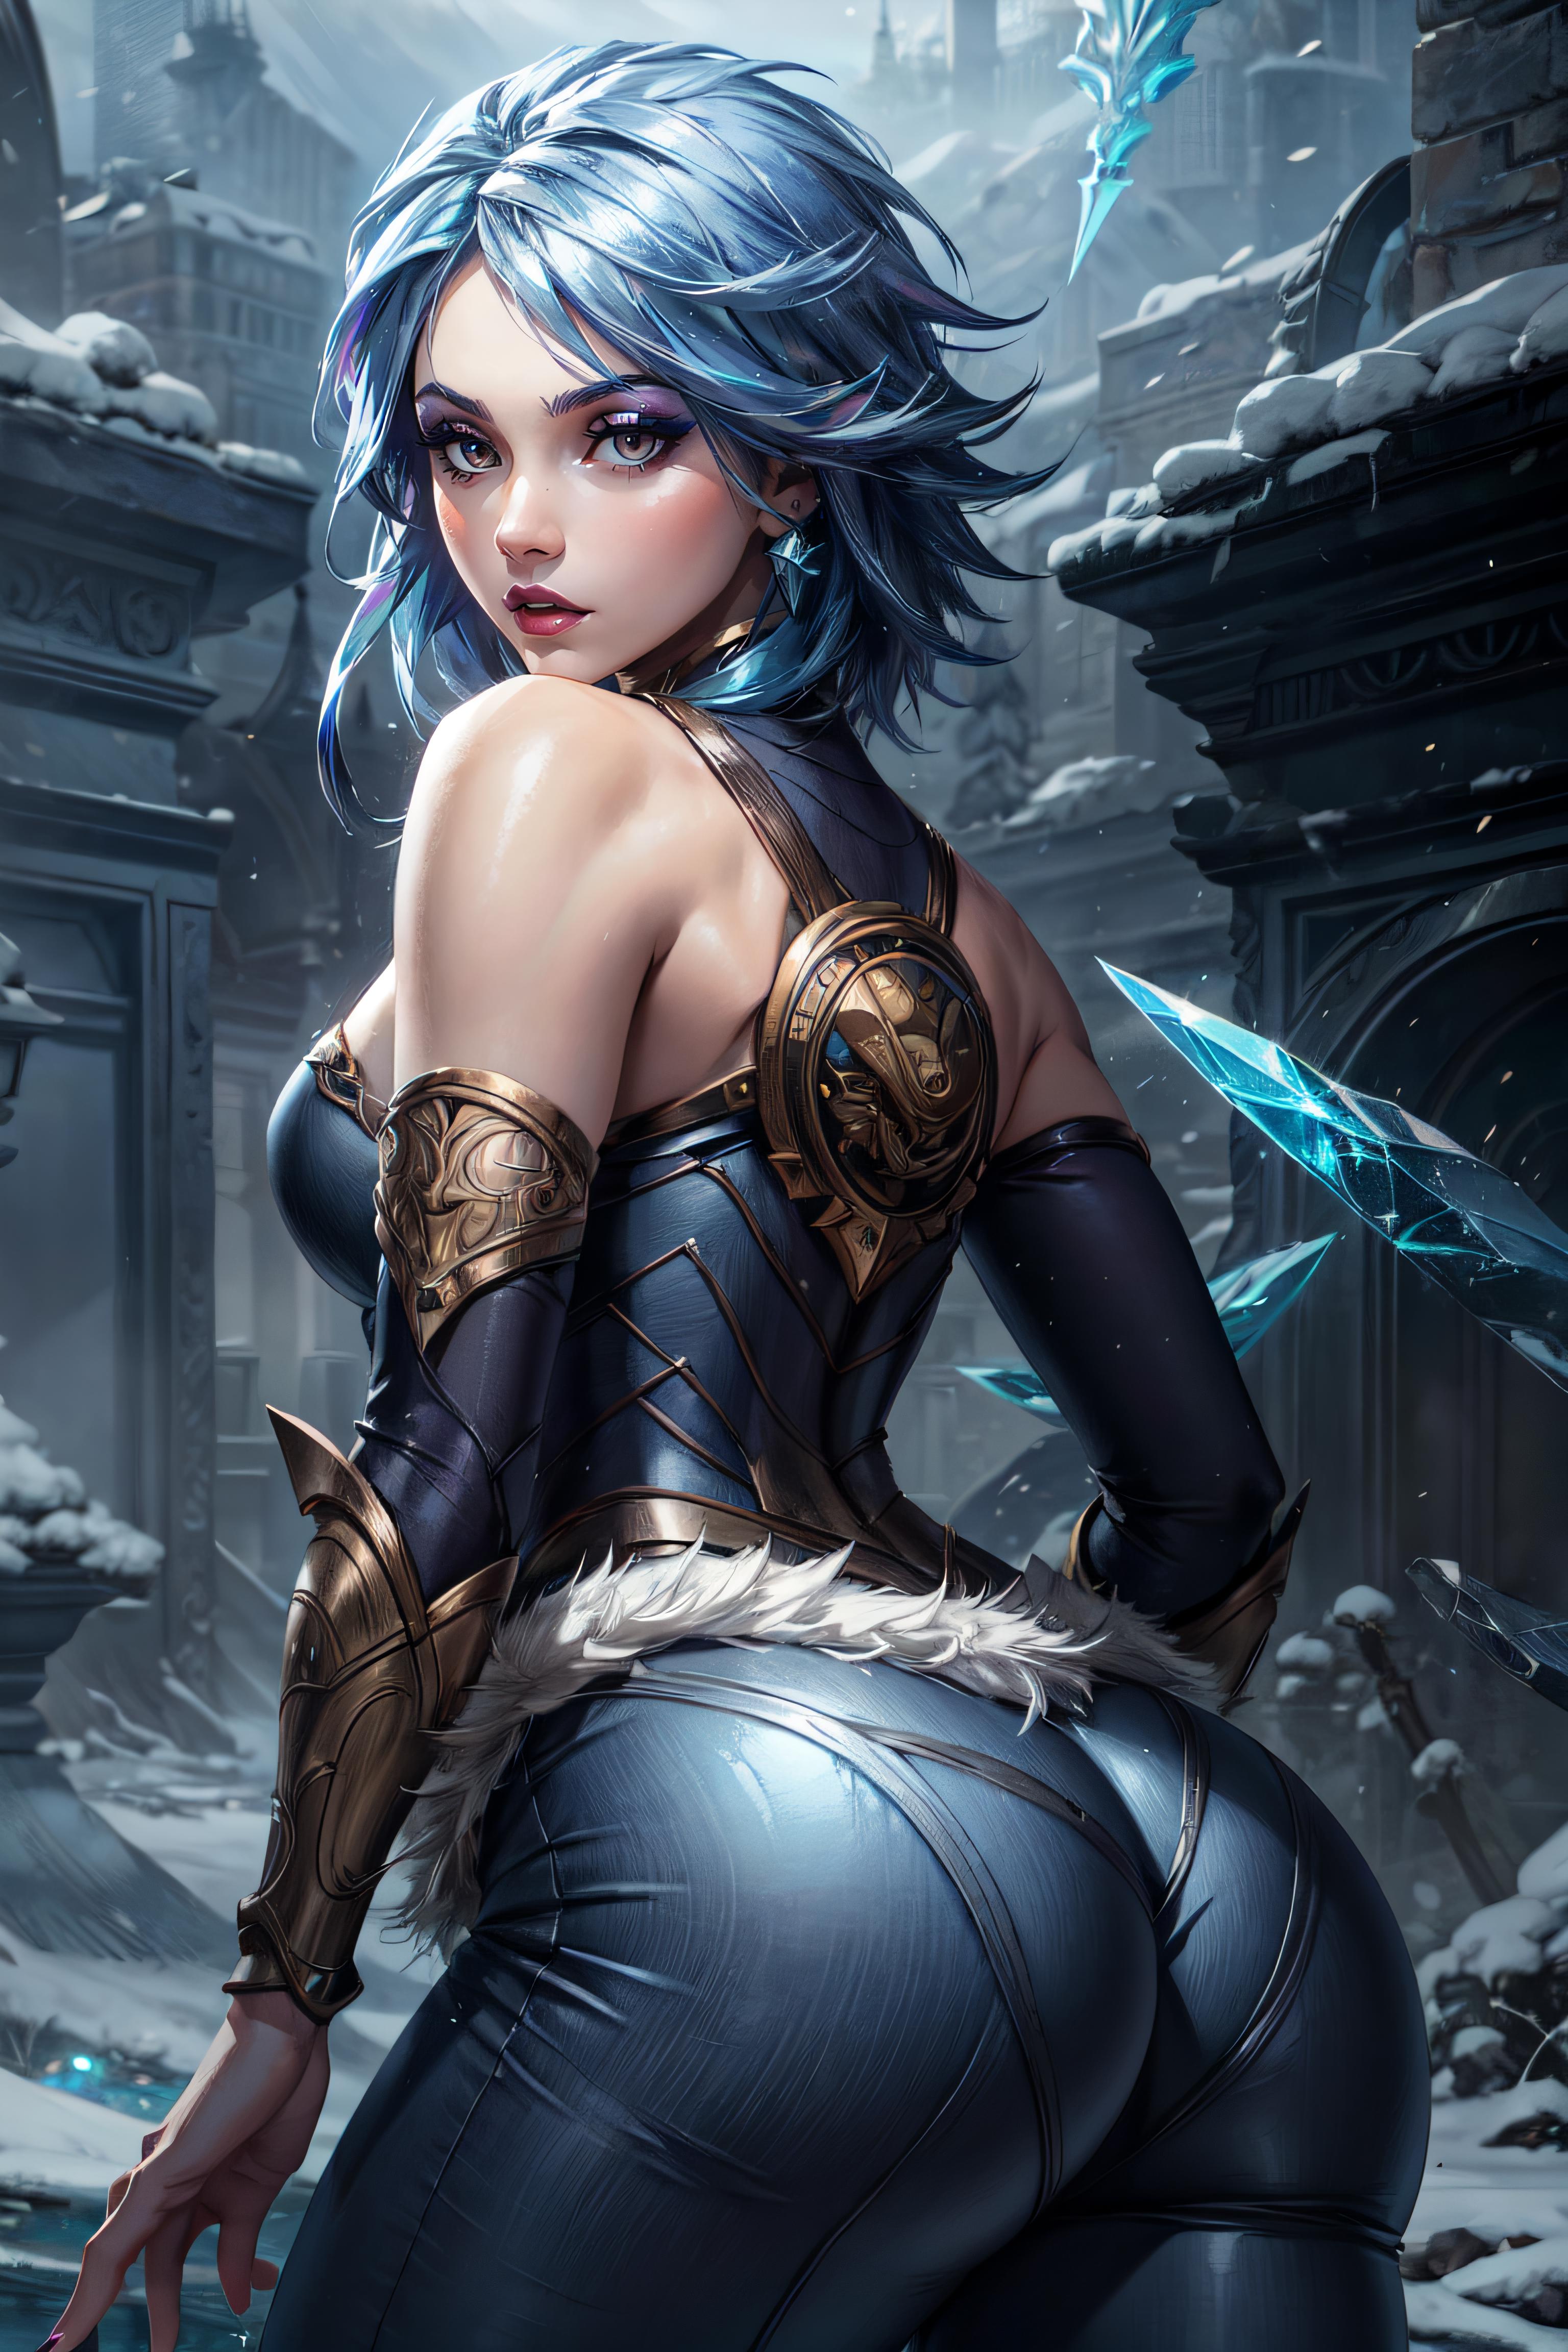 Frostblade Irelia | League of Legends image by bty_is_within_us